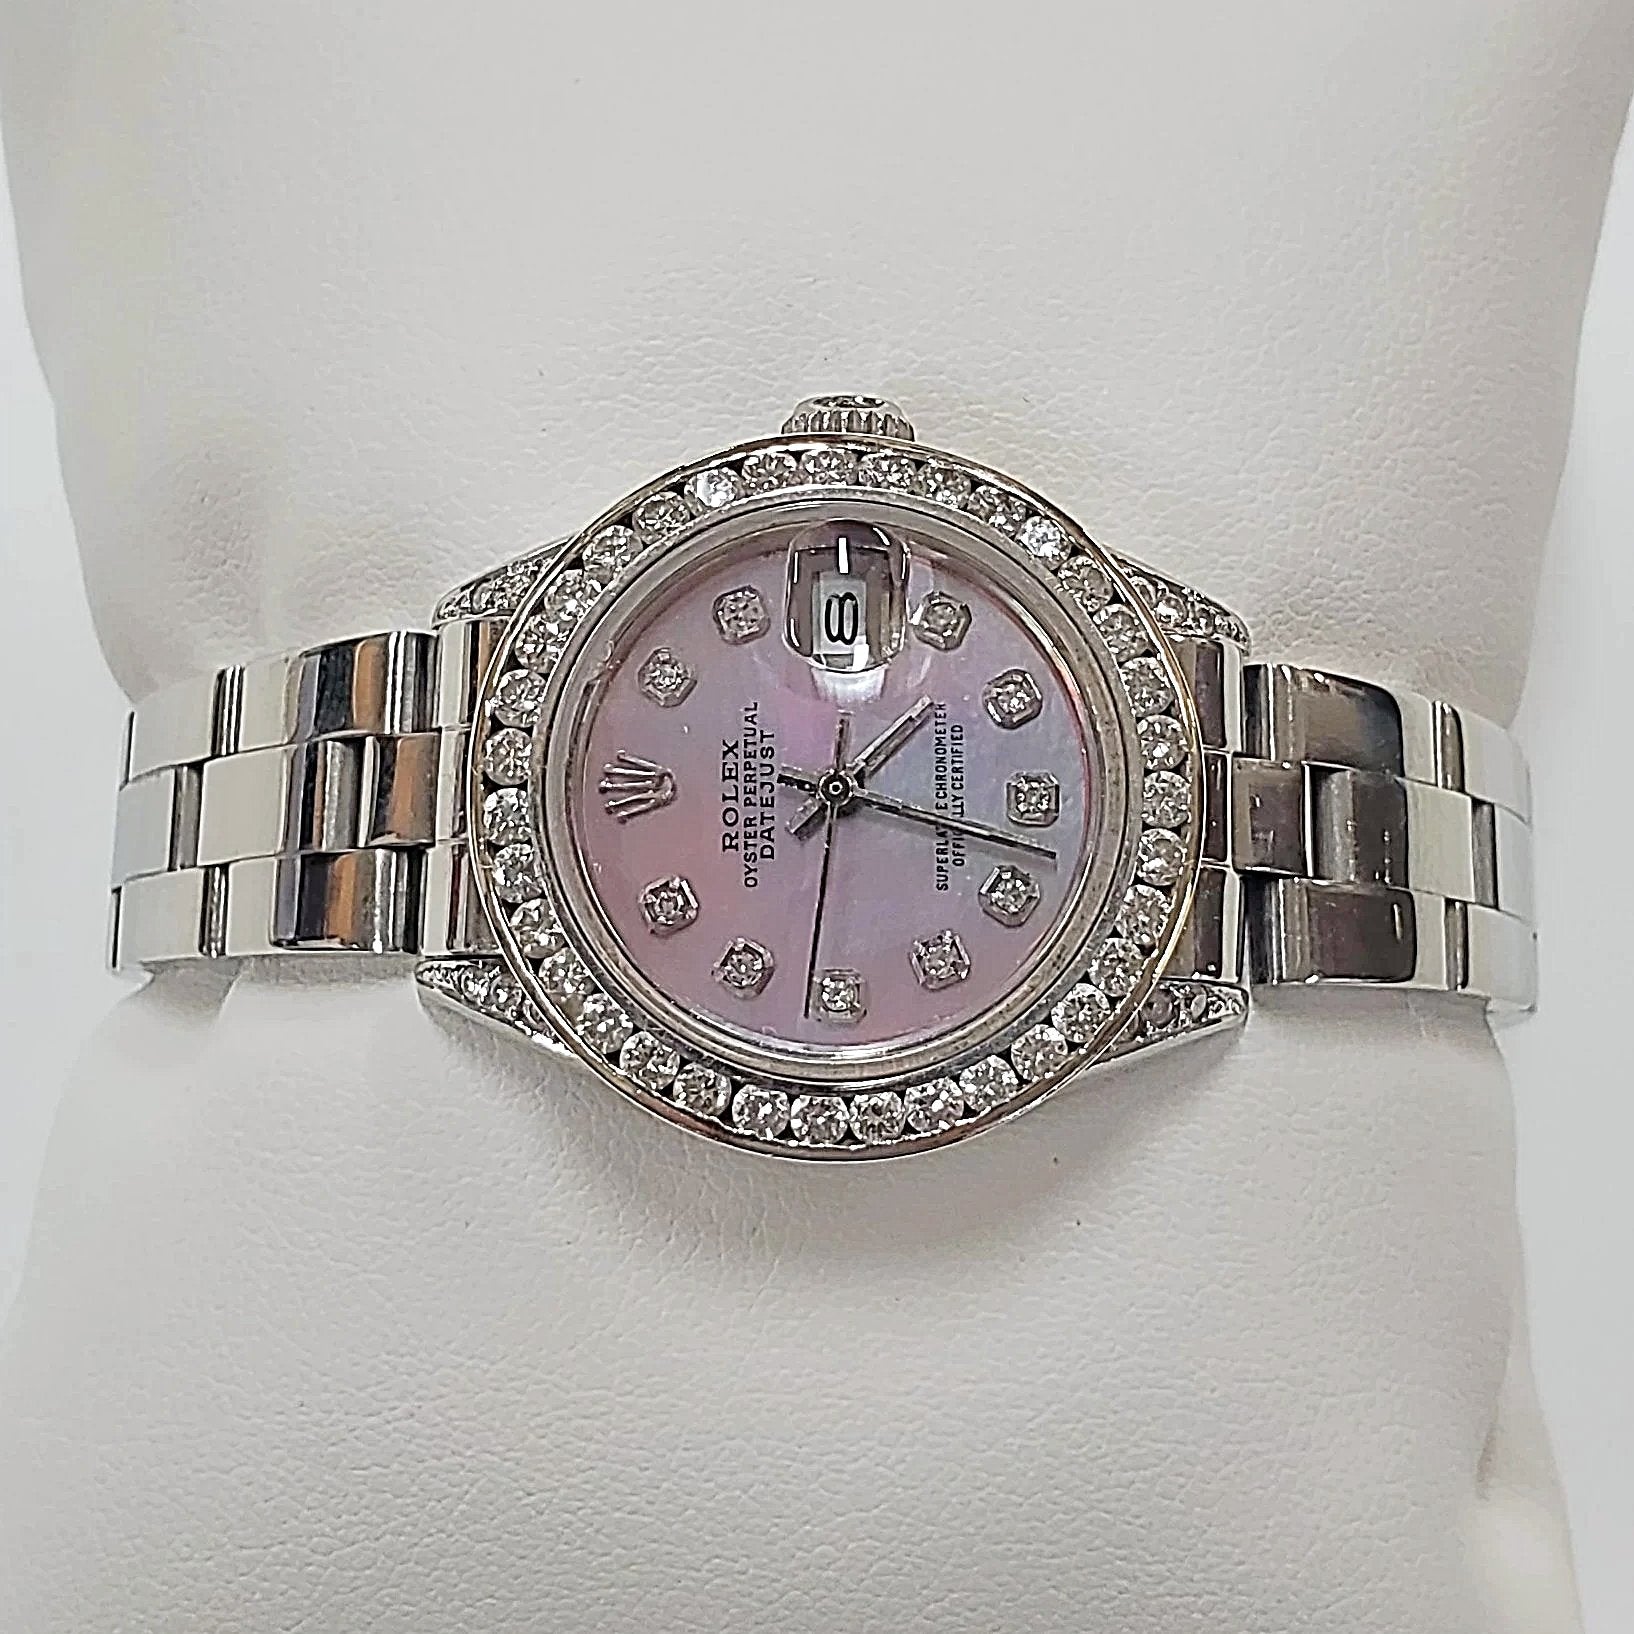 Ladies Rolex 26mm DateJust Stainless Steel Watch with Mother of Pearl Diamond Dial and Custom Diamond Bezel. (Pre-Owned)